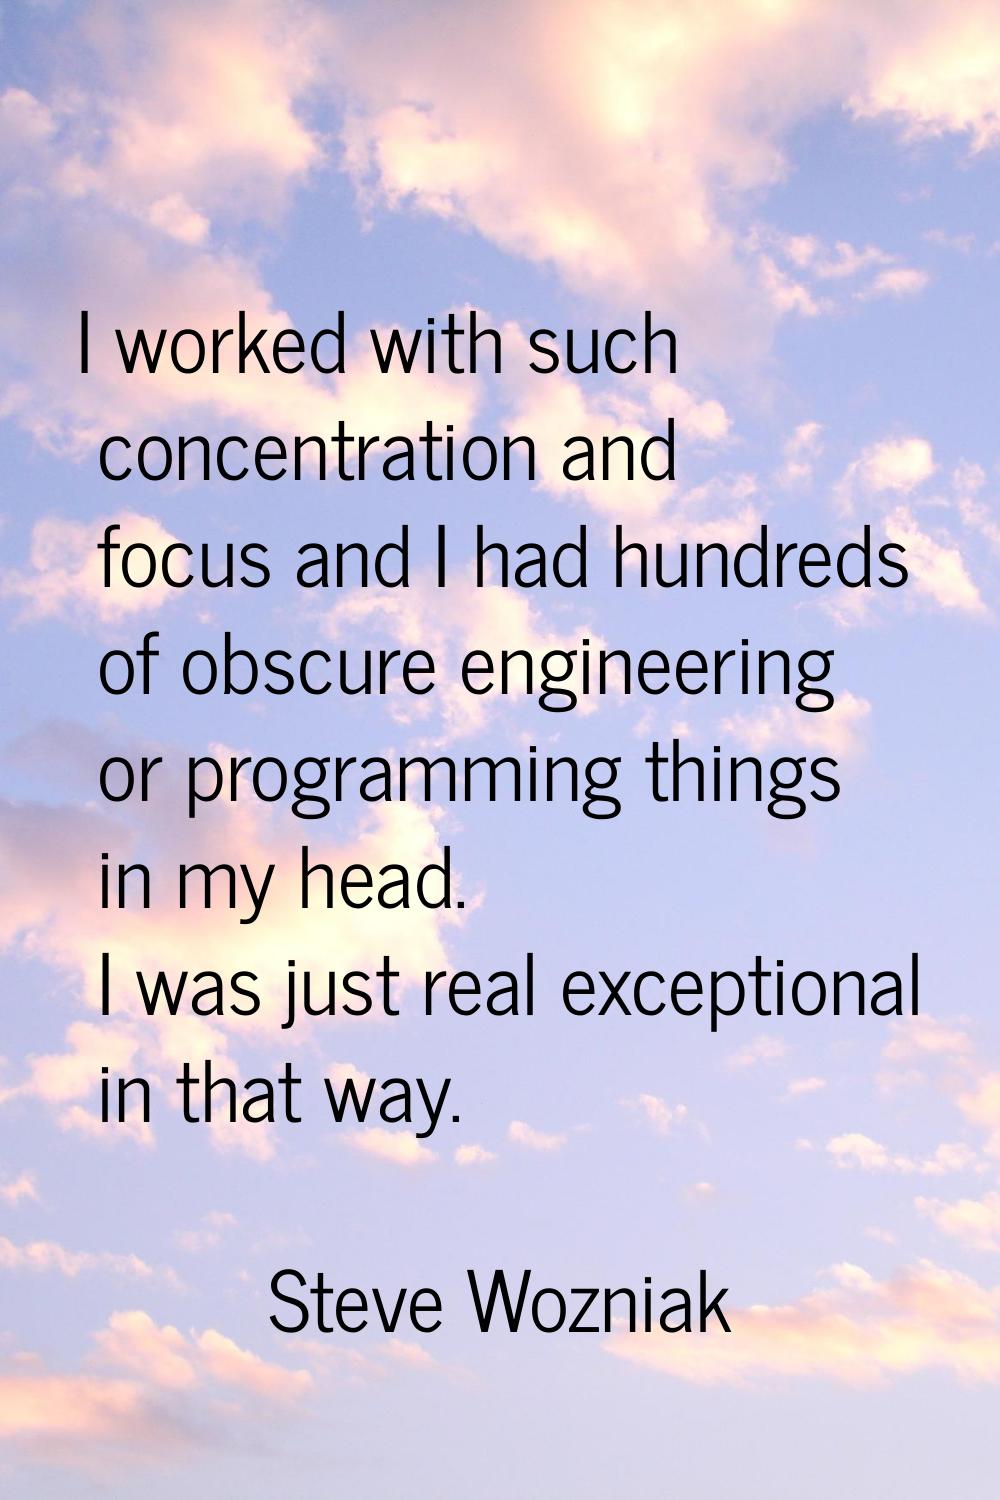 I worked with such concentration and focus and I had hundreds of obscure engineering or programming